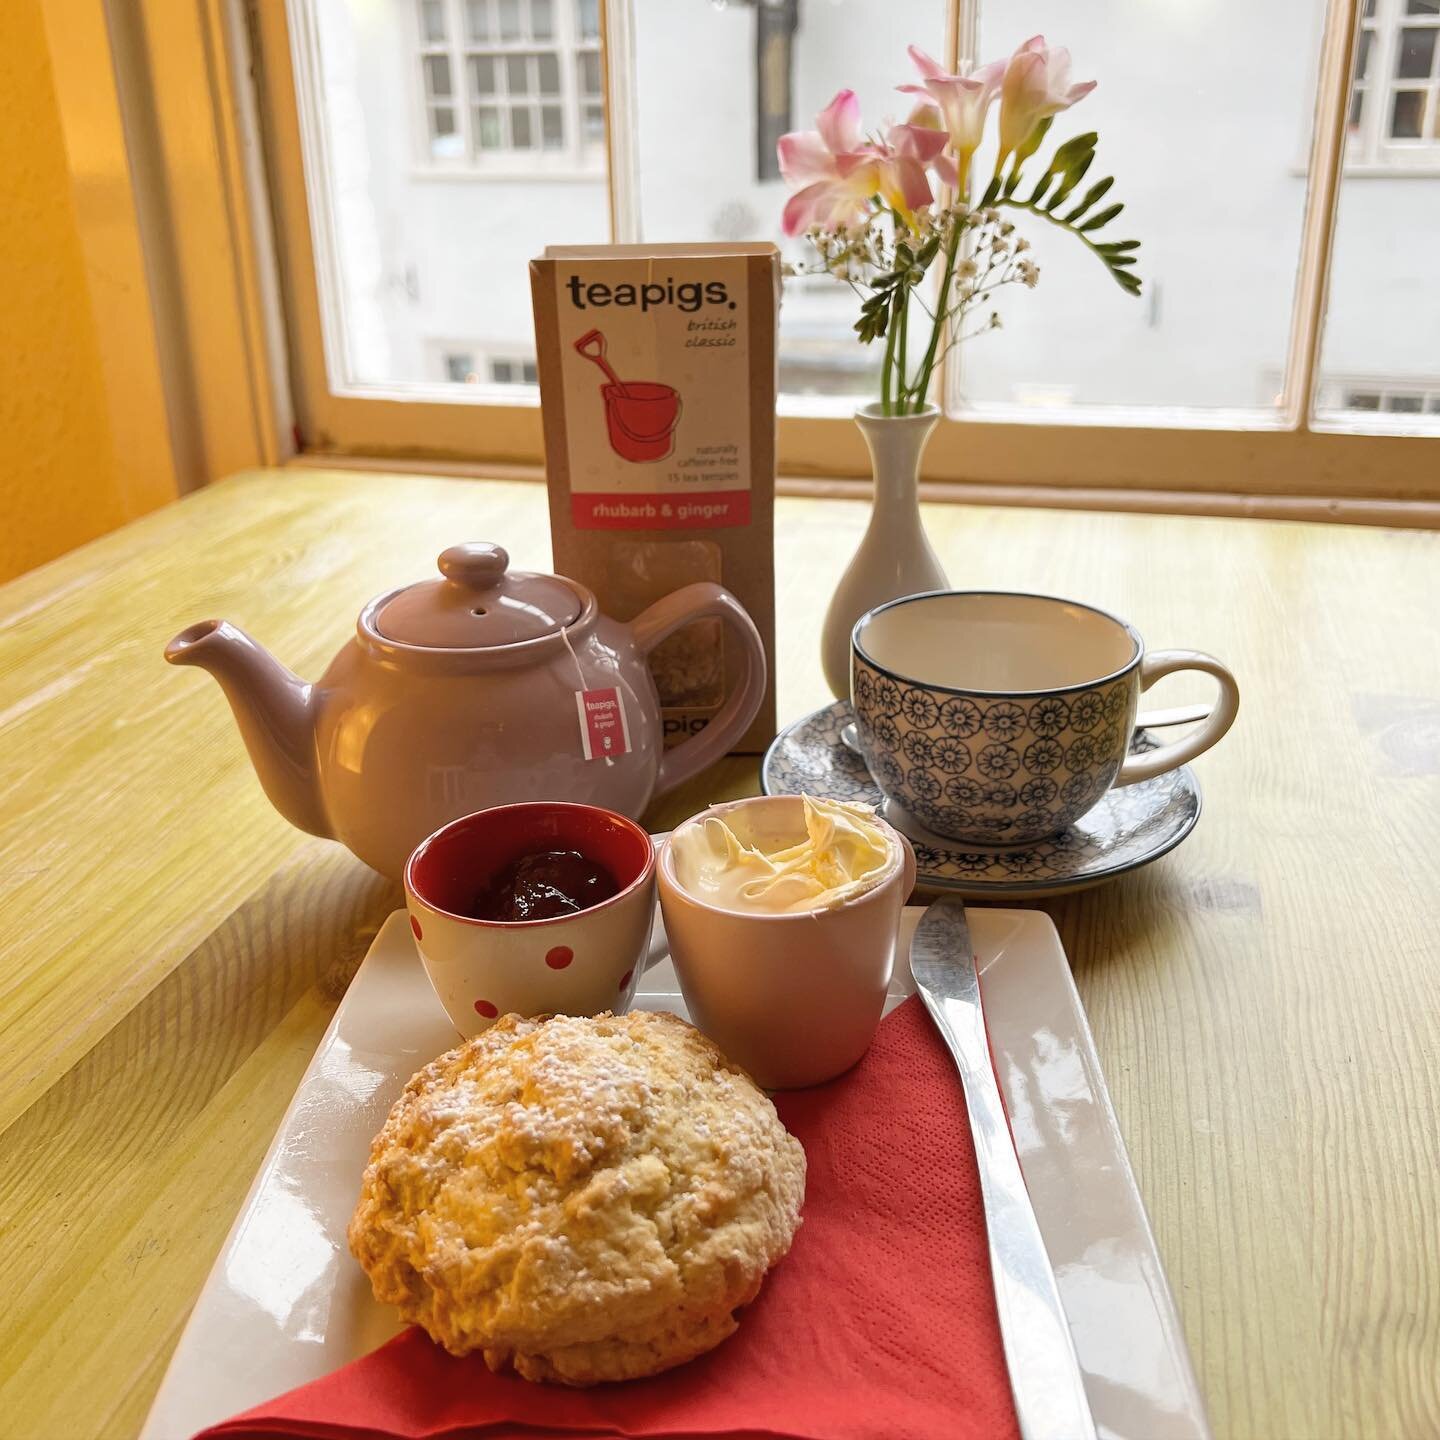 New special cream tea! One of our popular ginger scones, with clotted cream, rhubarb and ginger jam and a pot of any teapigs tea 🫖
.
.
.
#romsey #romseycafe #teacups #creamtea #rhubarbandginger #gingerscone #homemadescone #teapigs #teapigsuk #hampsh